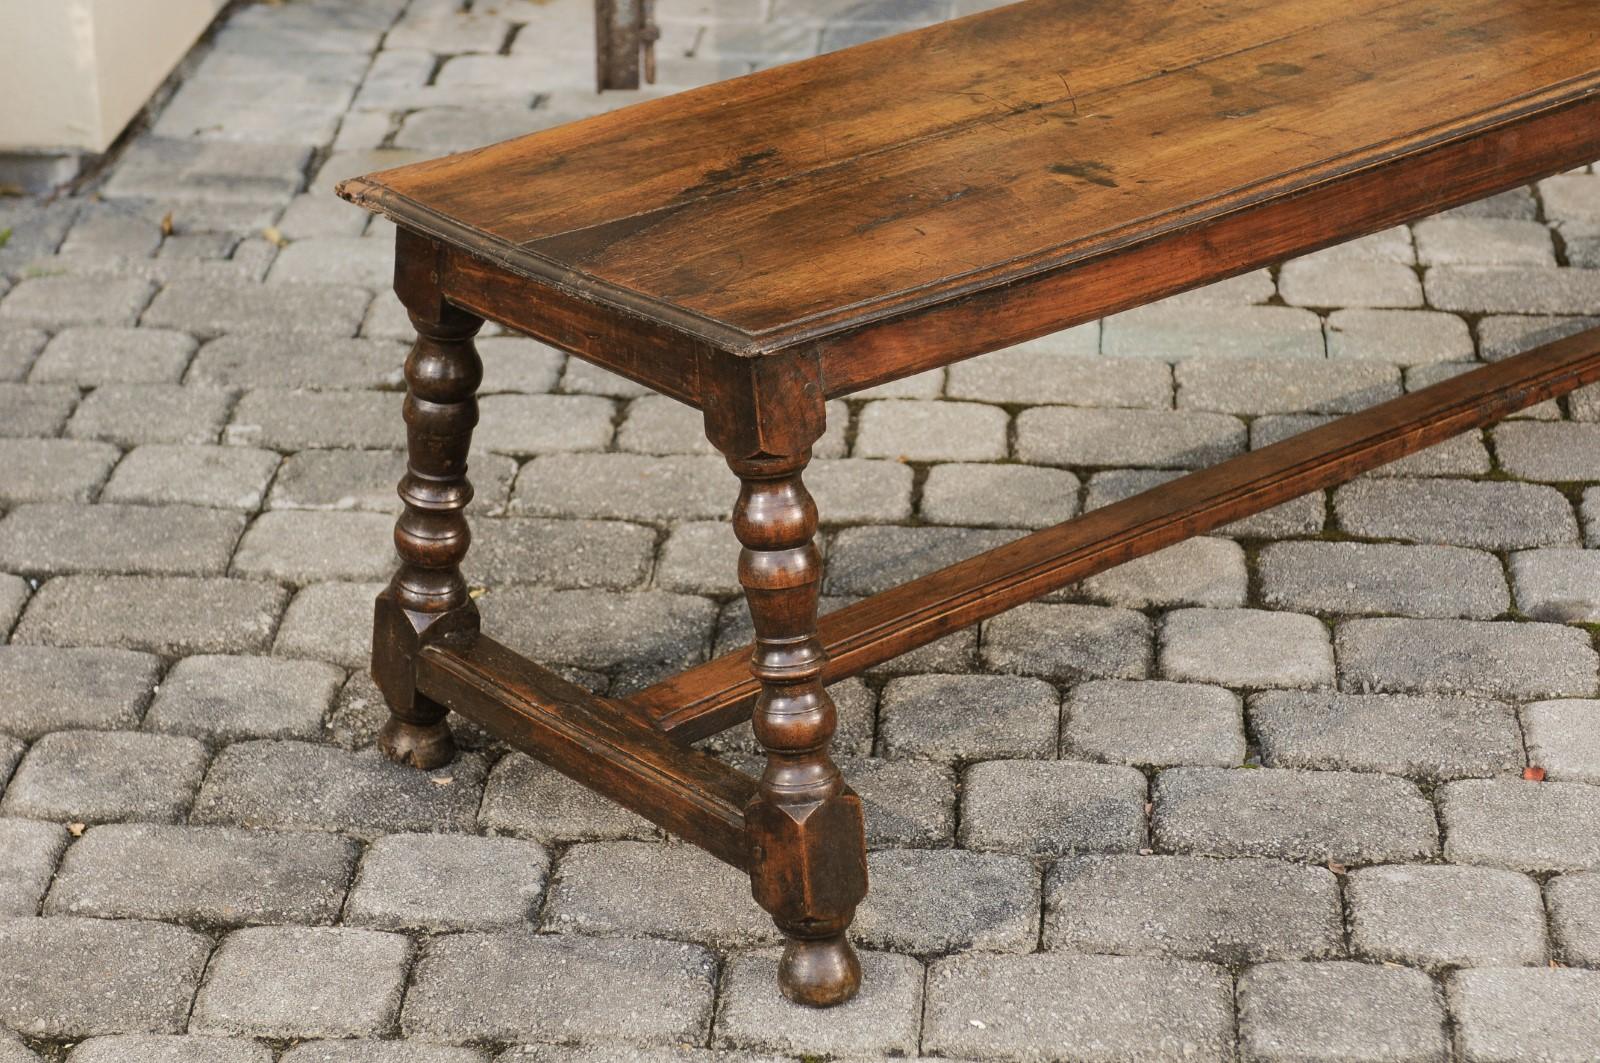 19th Century Italian 1800s Walnut Bench with Turned Legs and H-Form Cross Stretcher